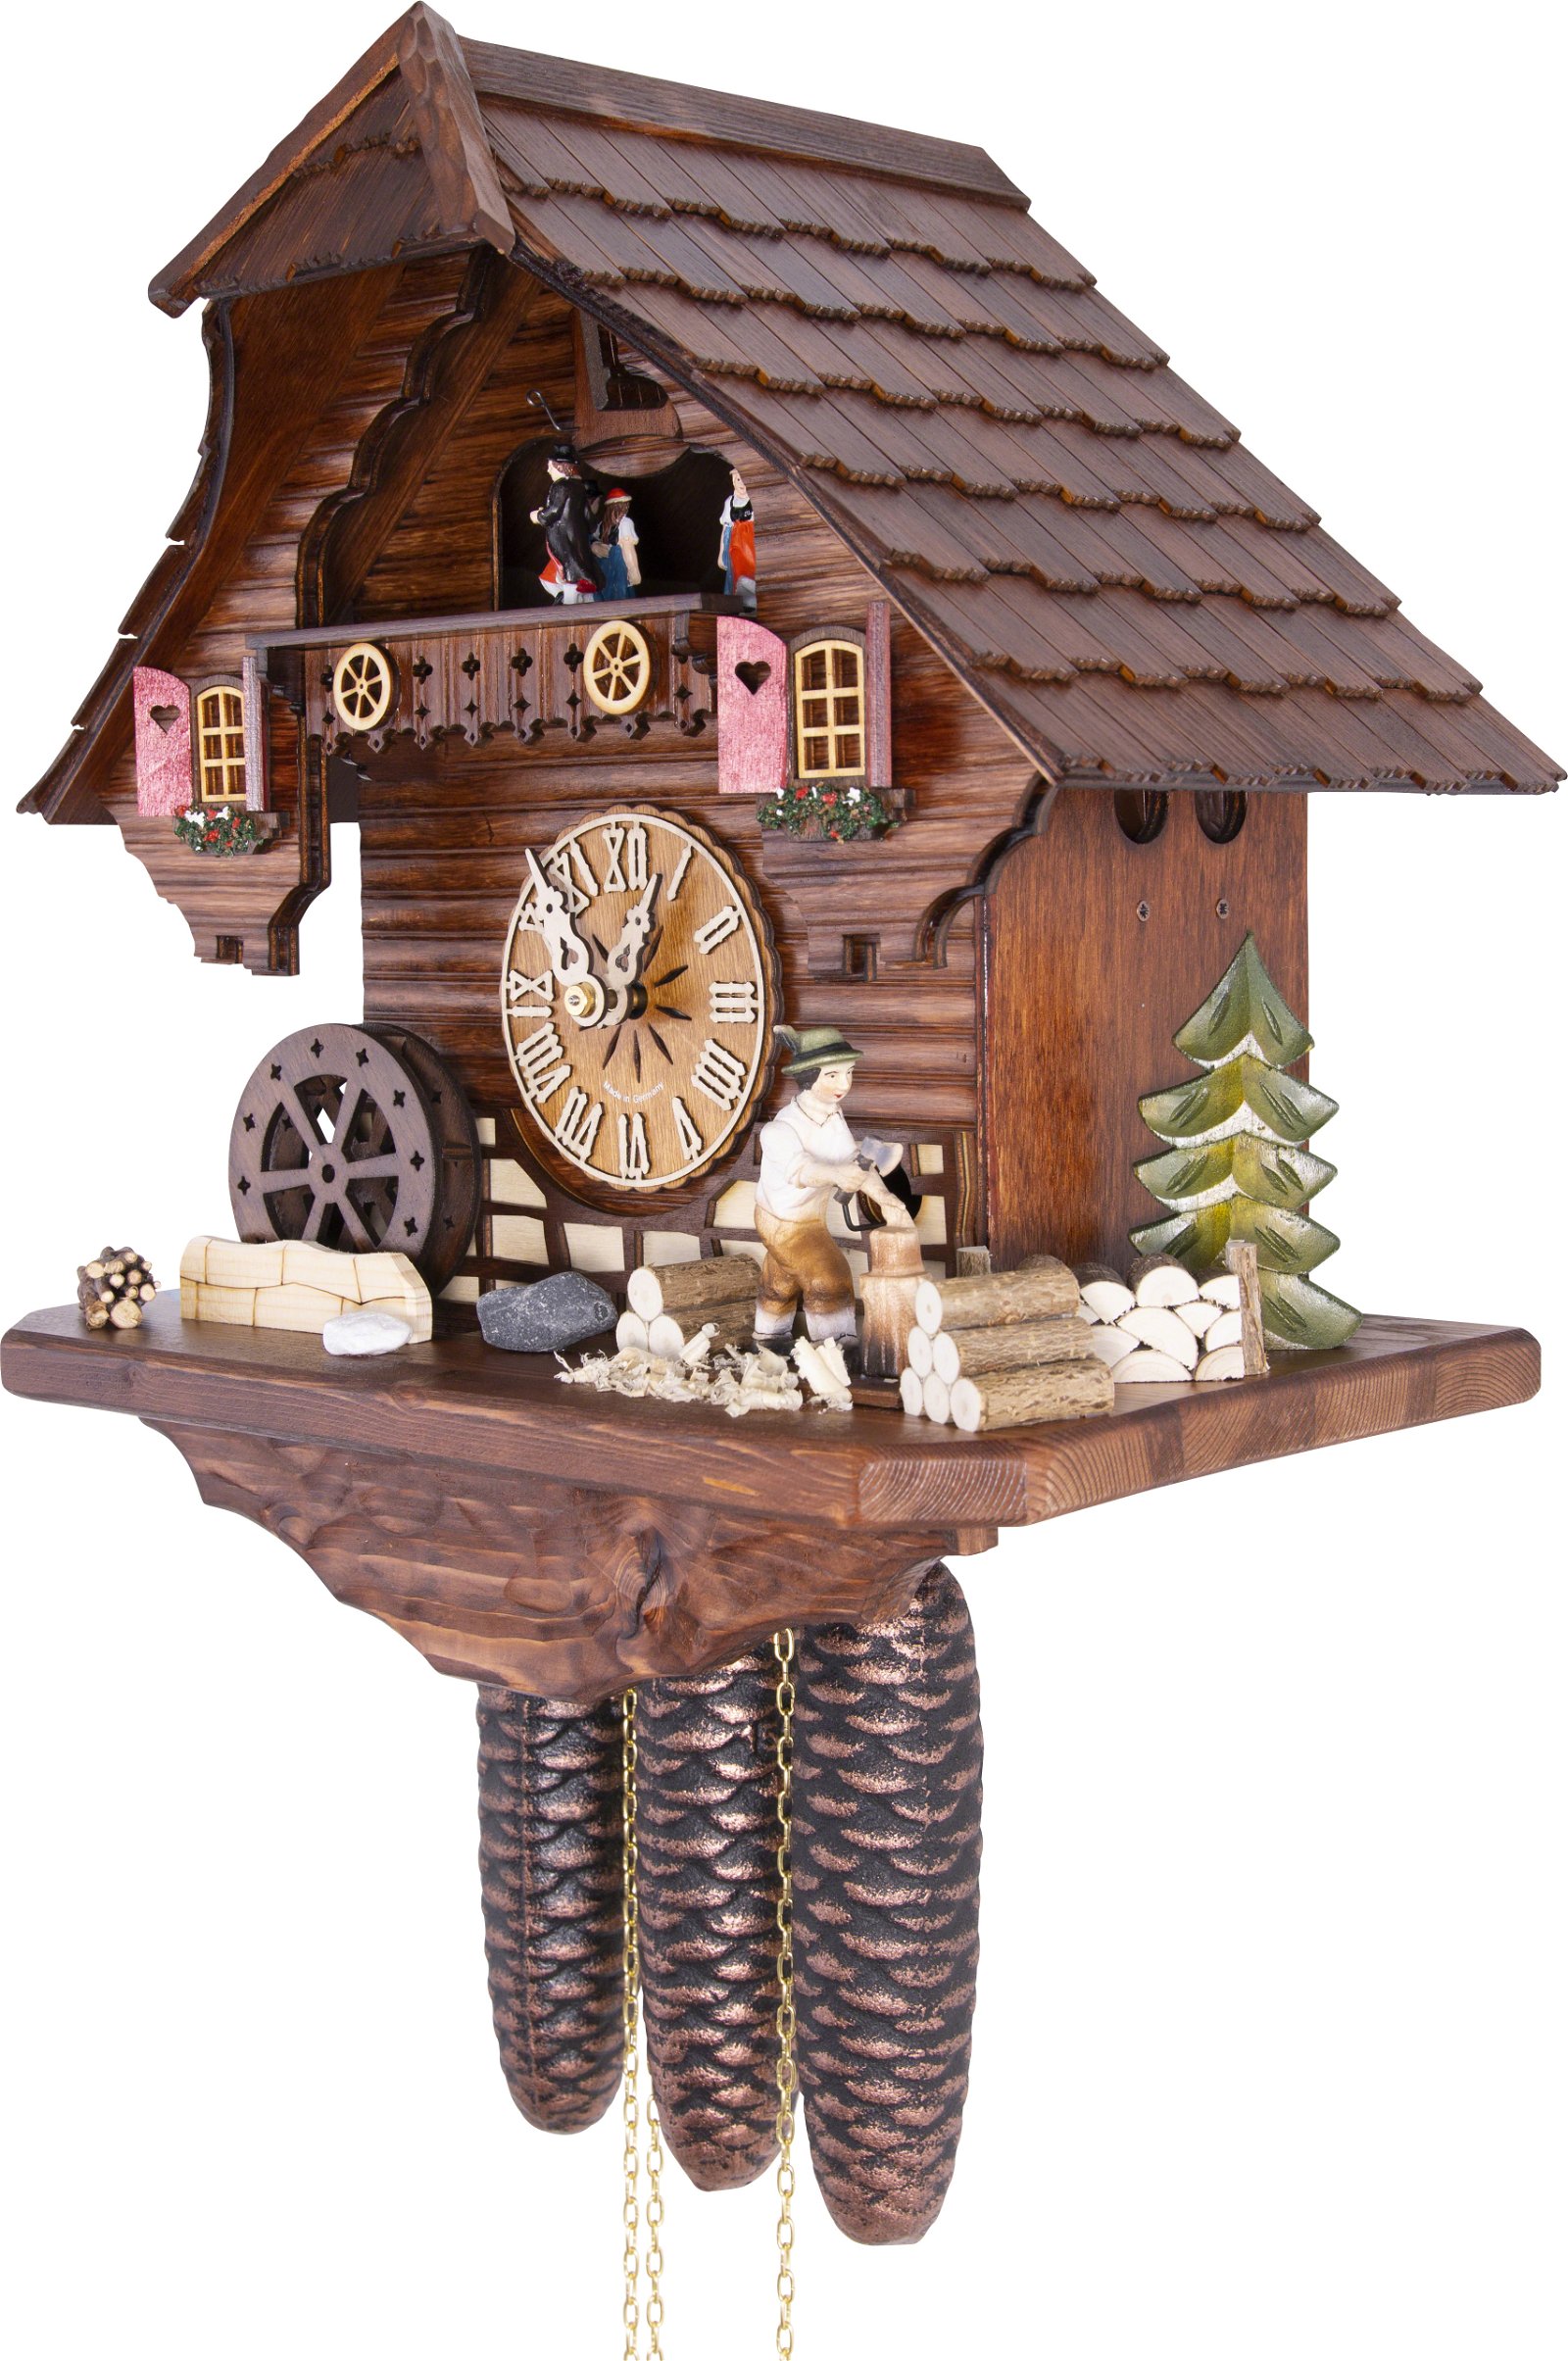 Cuckoo Clock Chalet Style 8 Day Movement 36cm by Hekas